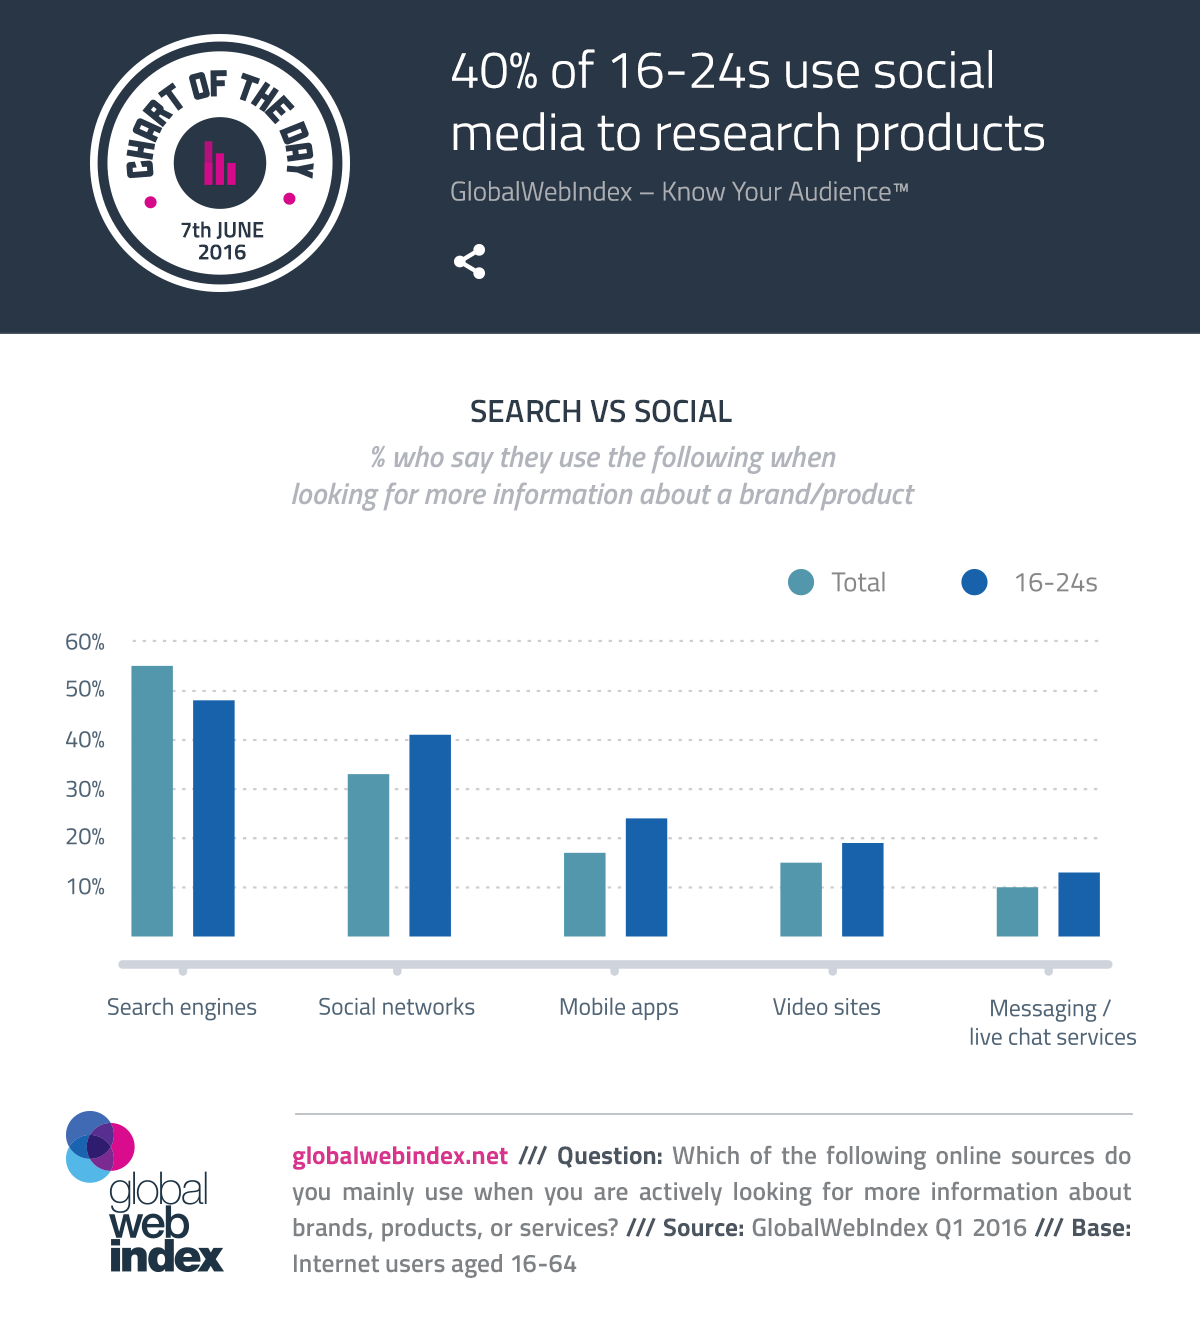 40% of 16-24s use social media to research products